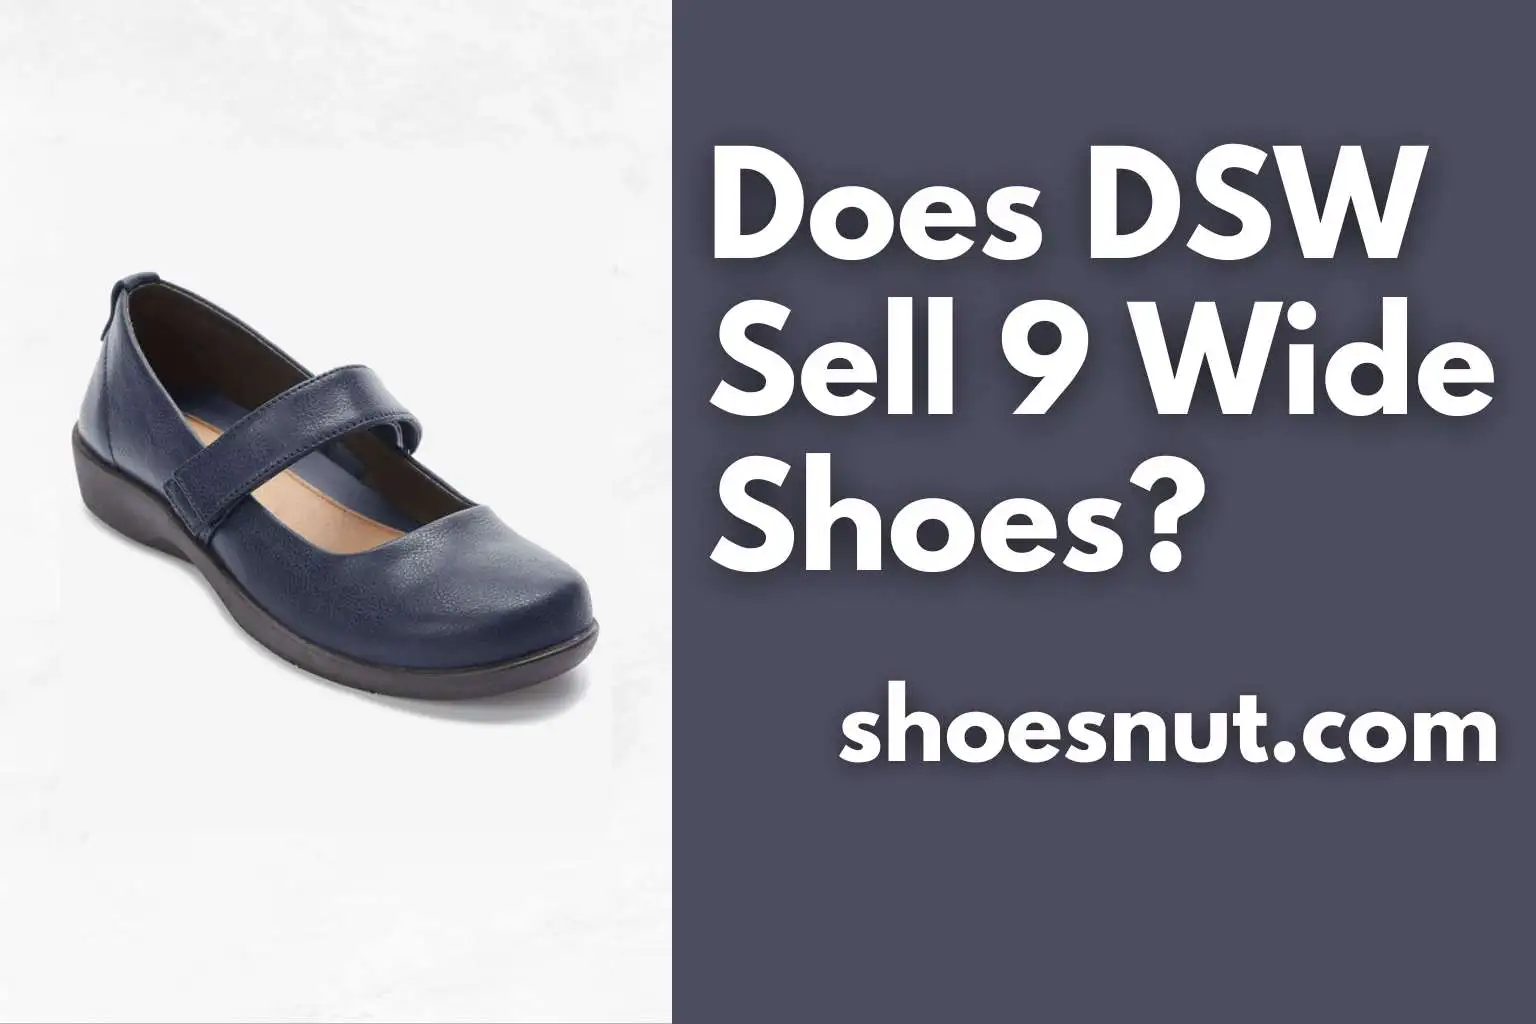 Does DSW Sell 9 Wide Shoes?